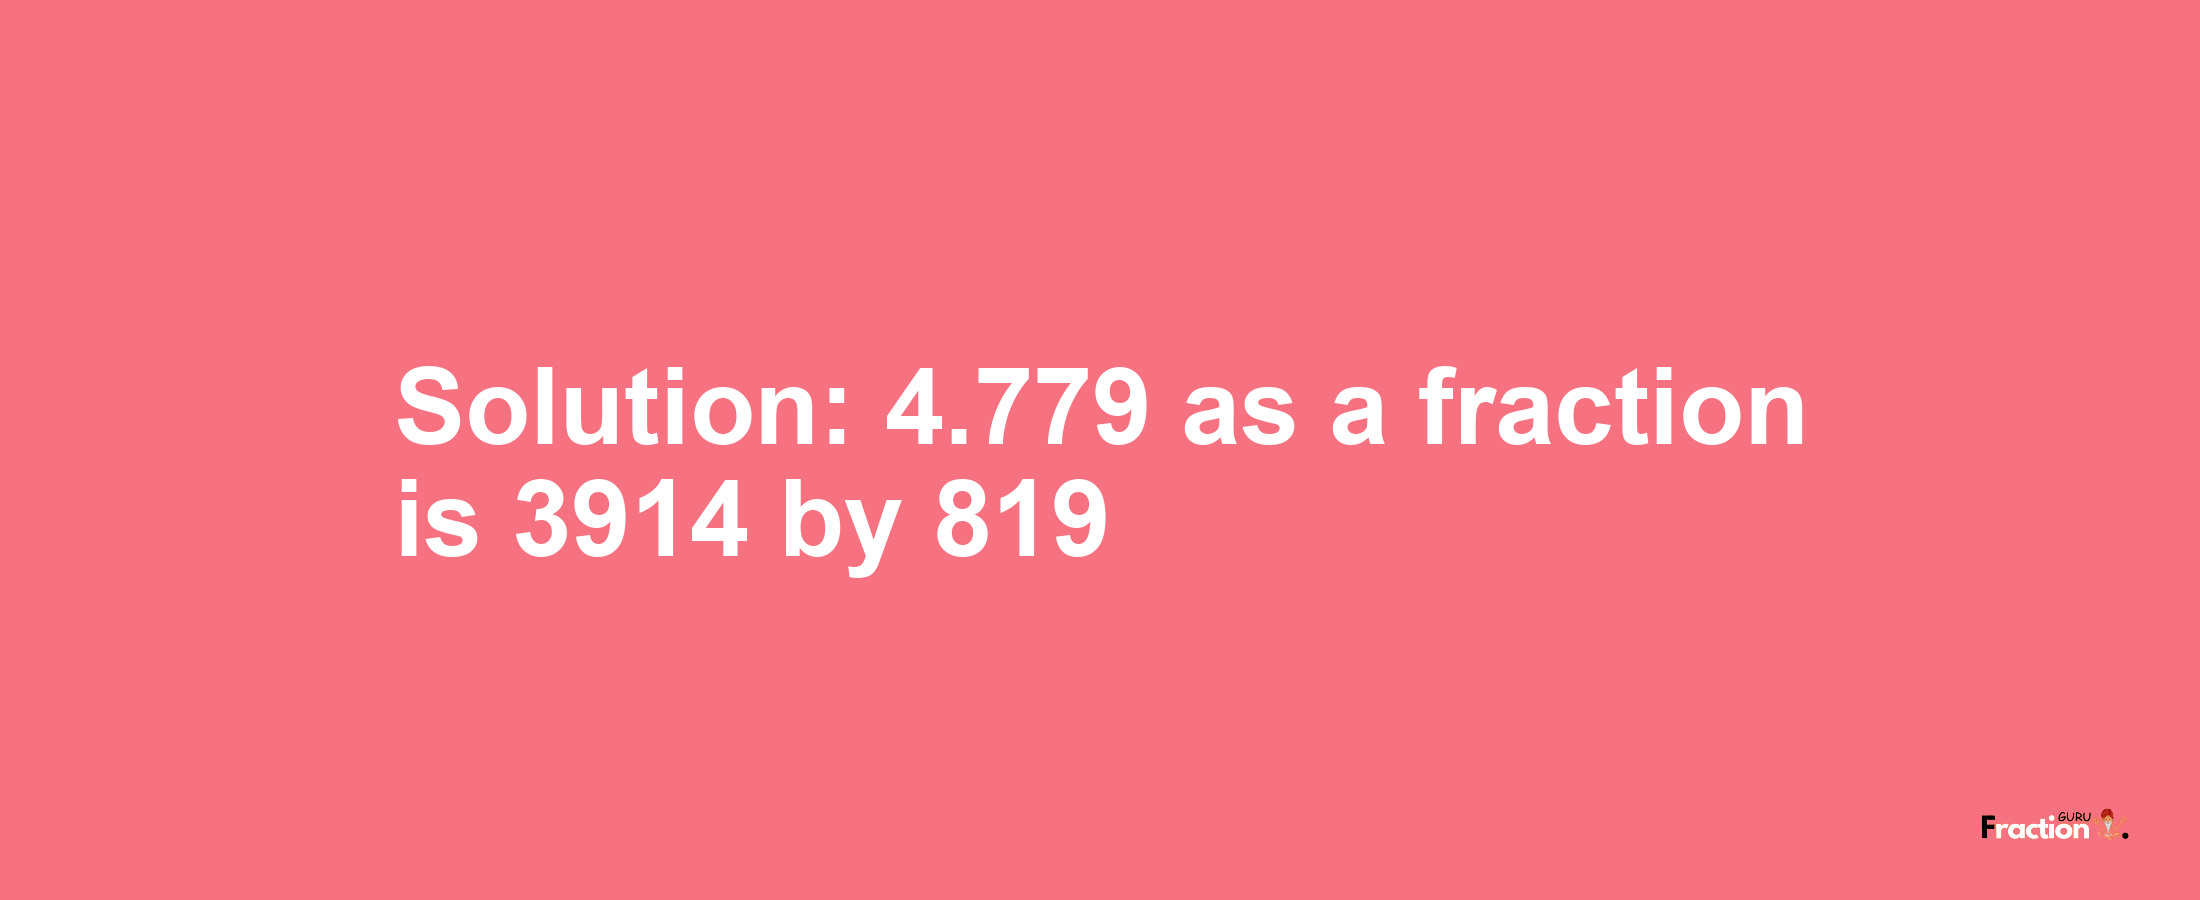 Solution:4.779 as a fraction is 3914/819